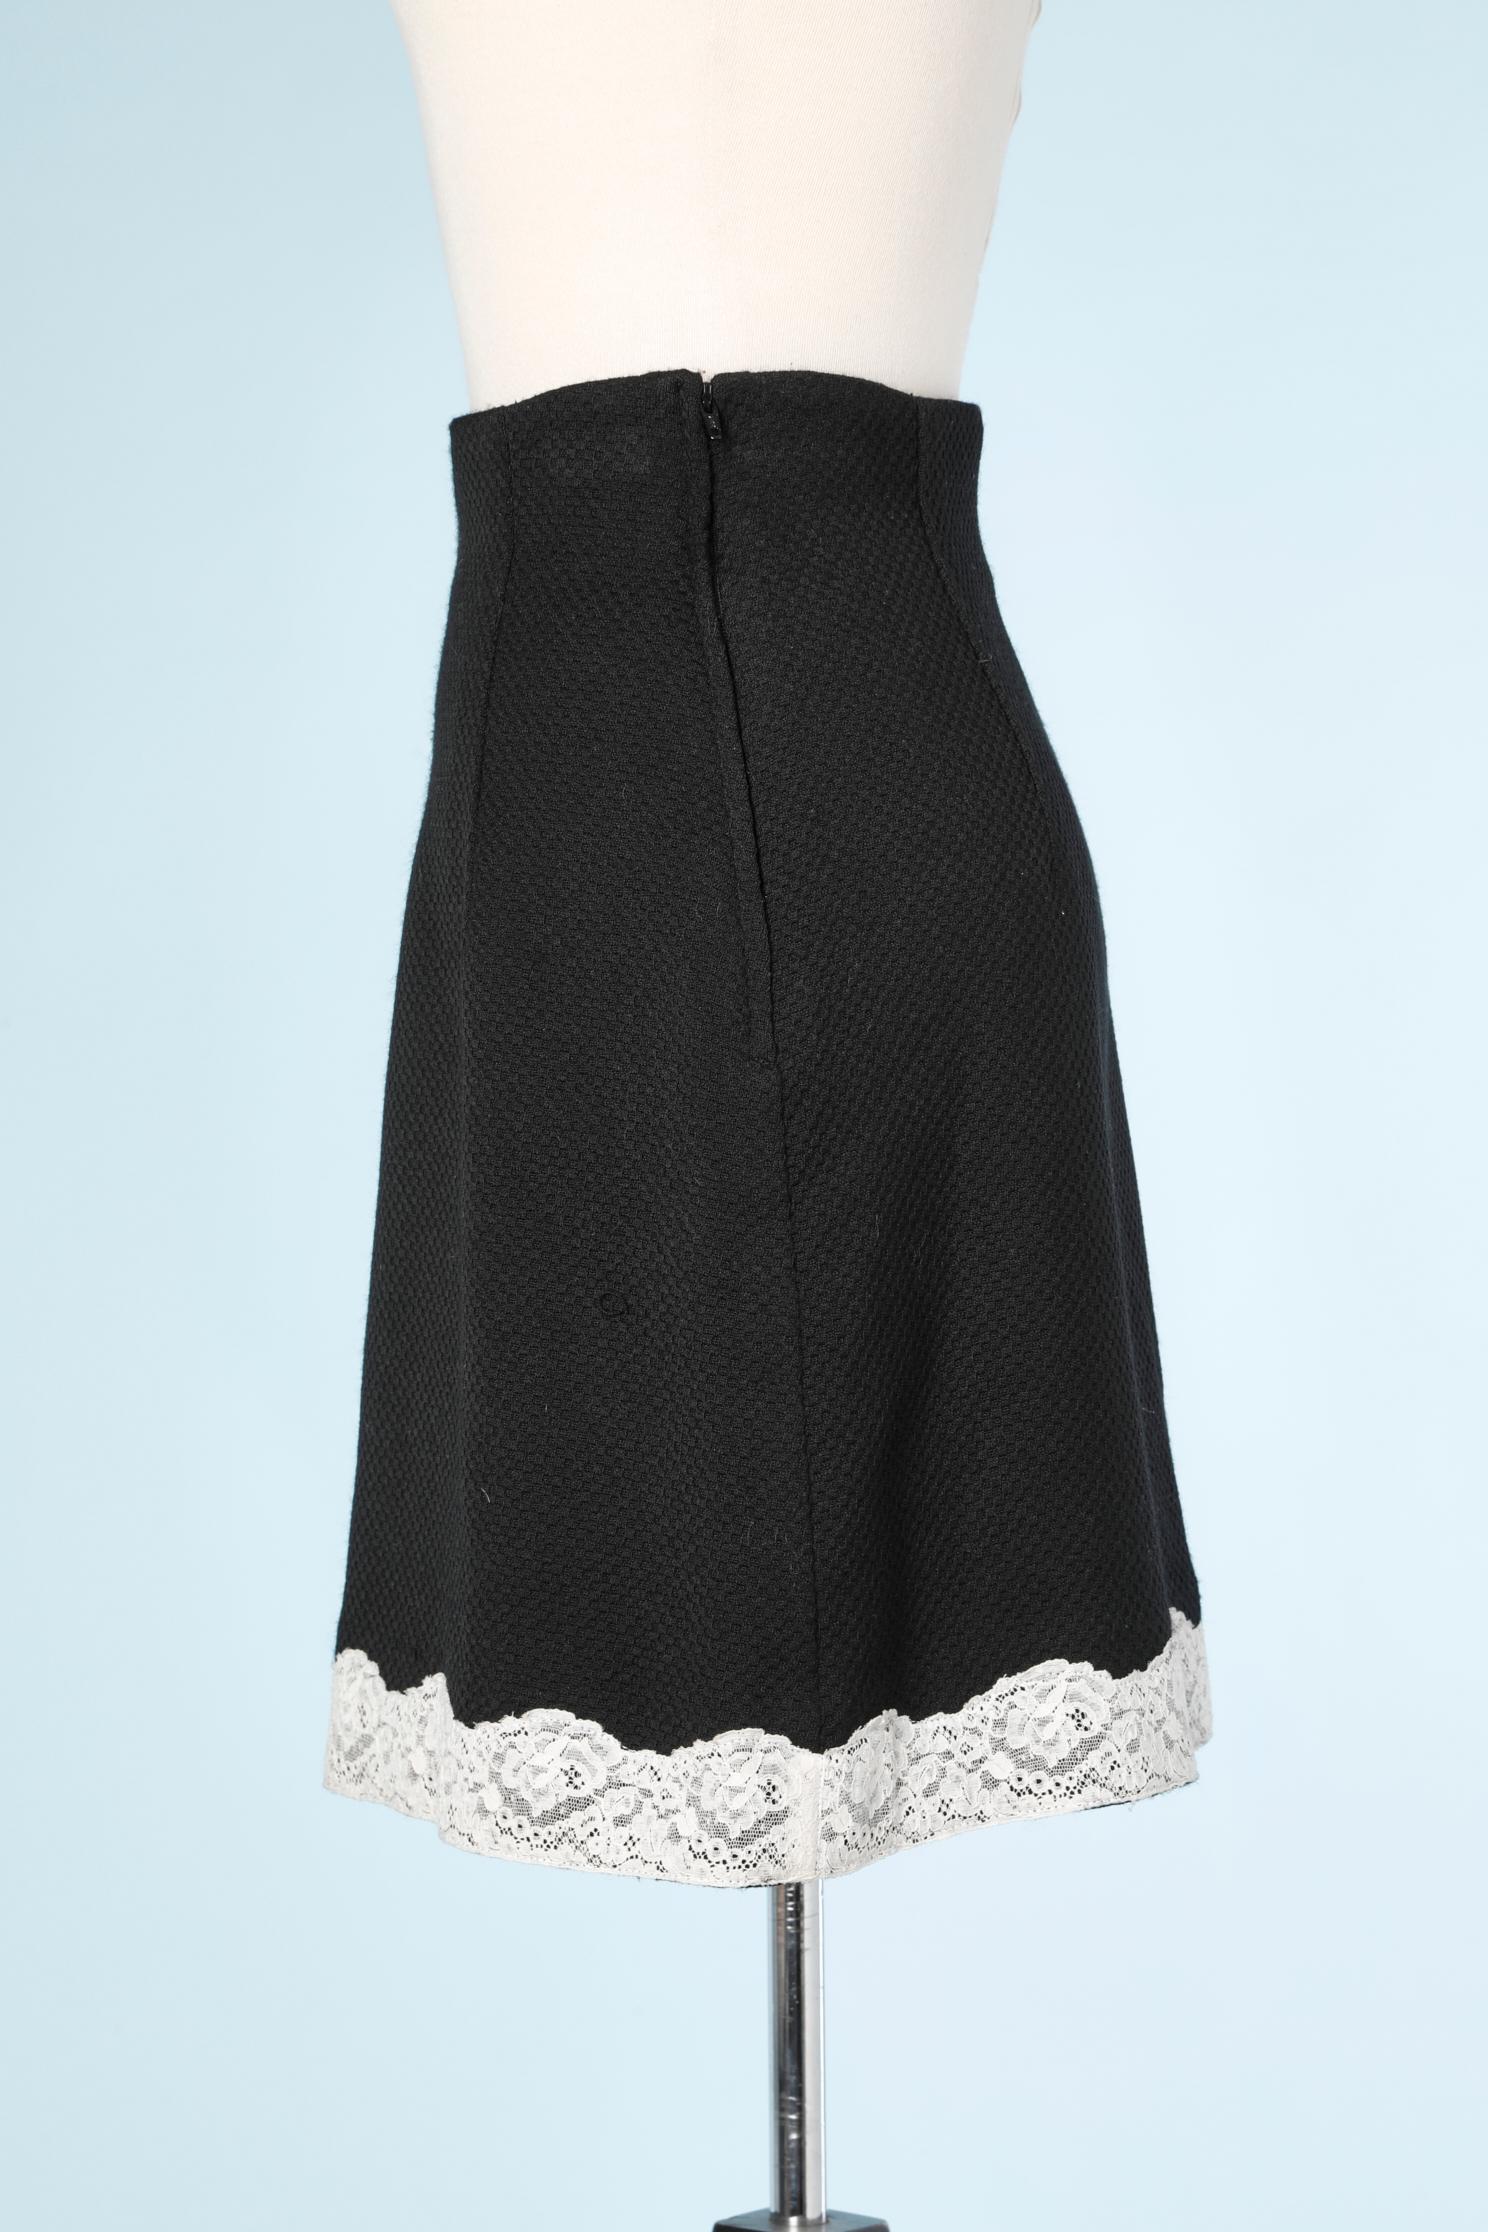 Women's Black wool skirt with white lace edge Chantal Thomass For Sale